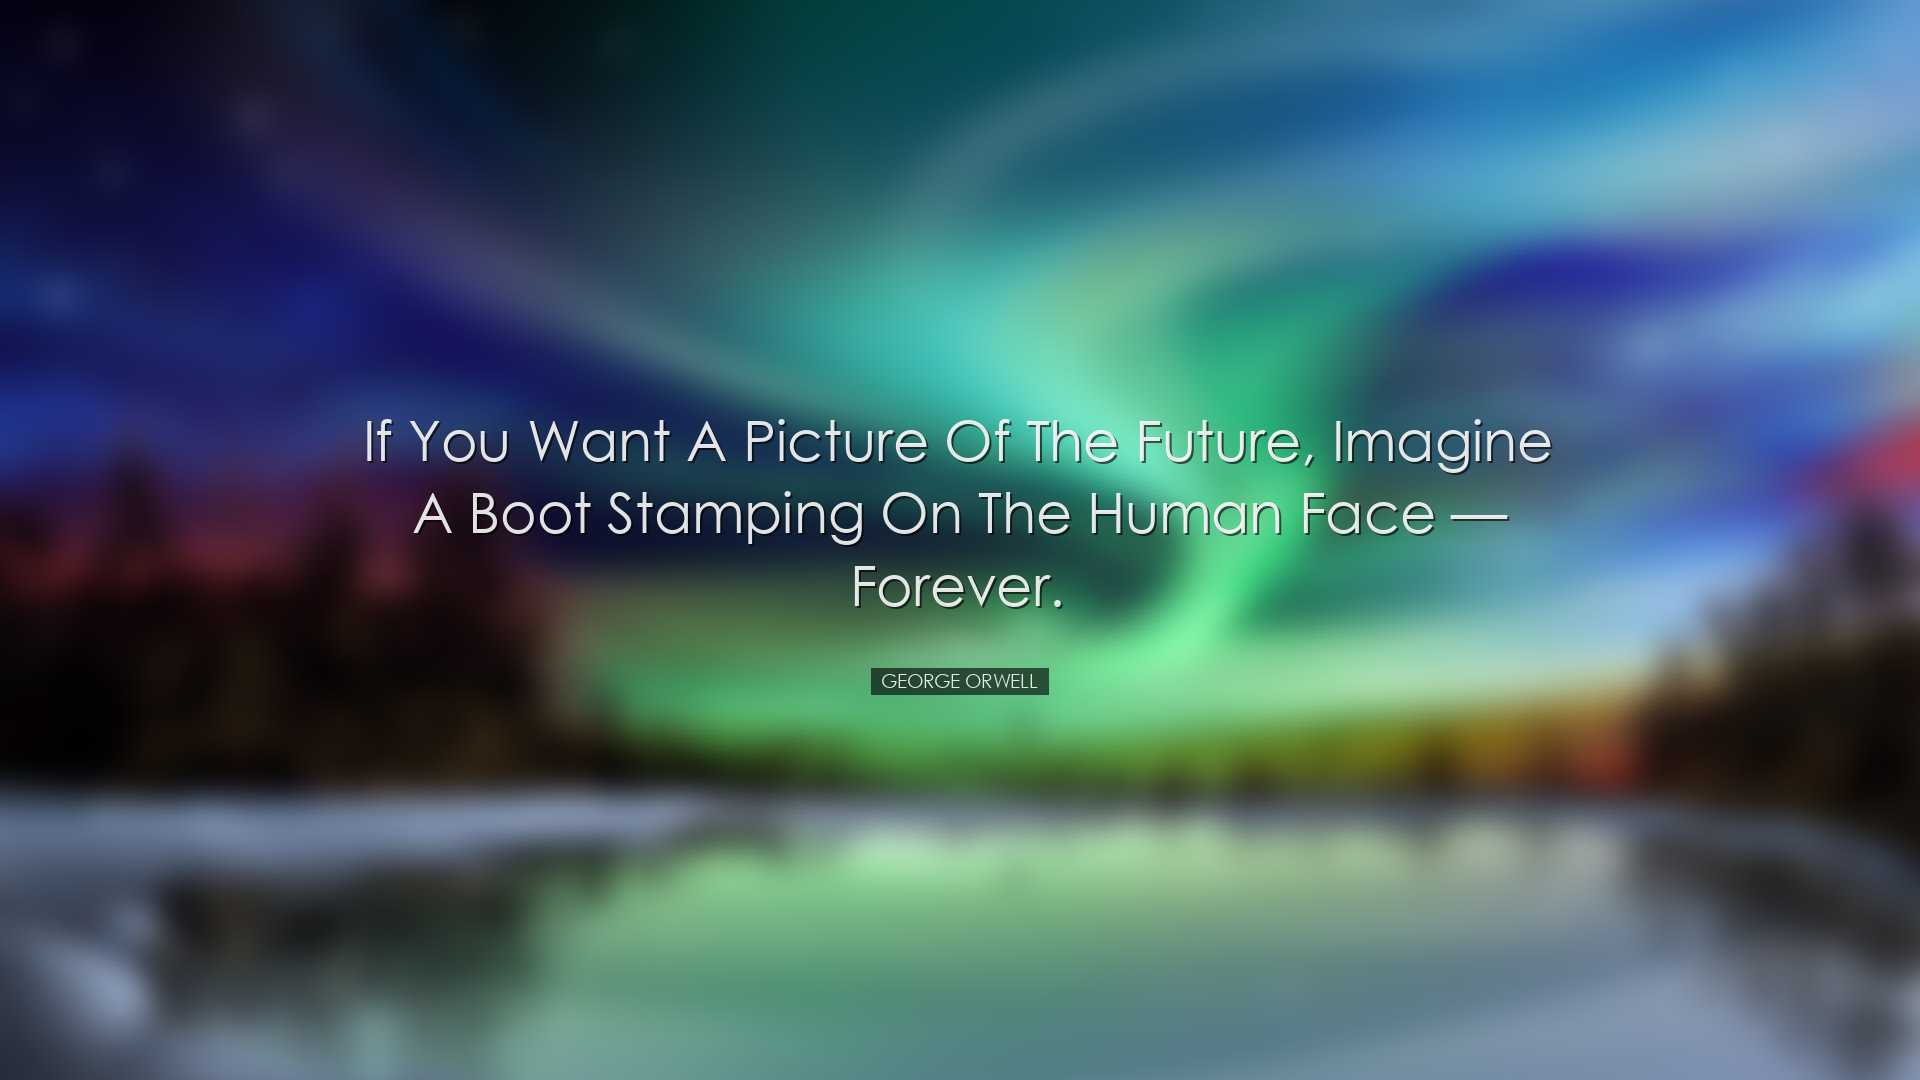 If you want a picture of the future, imagine a boot stamping on th